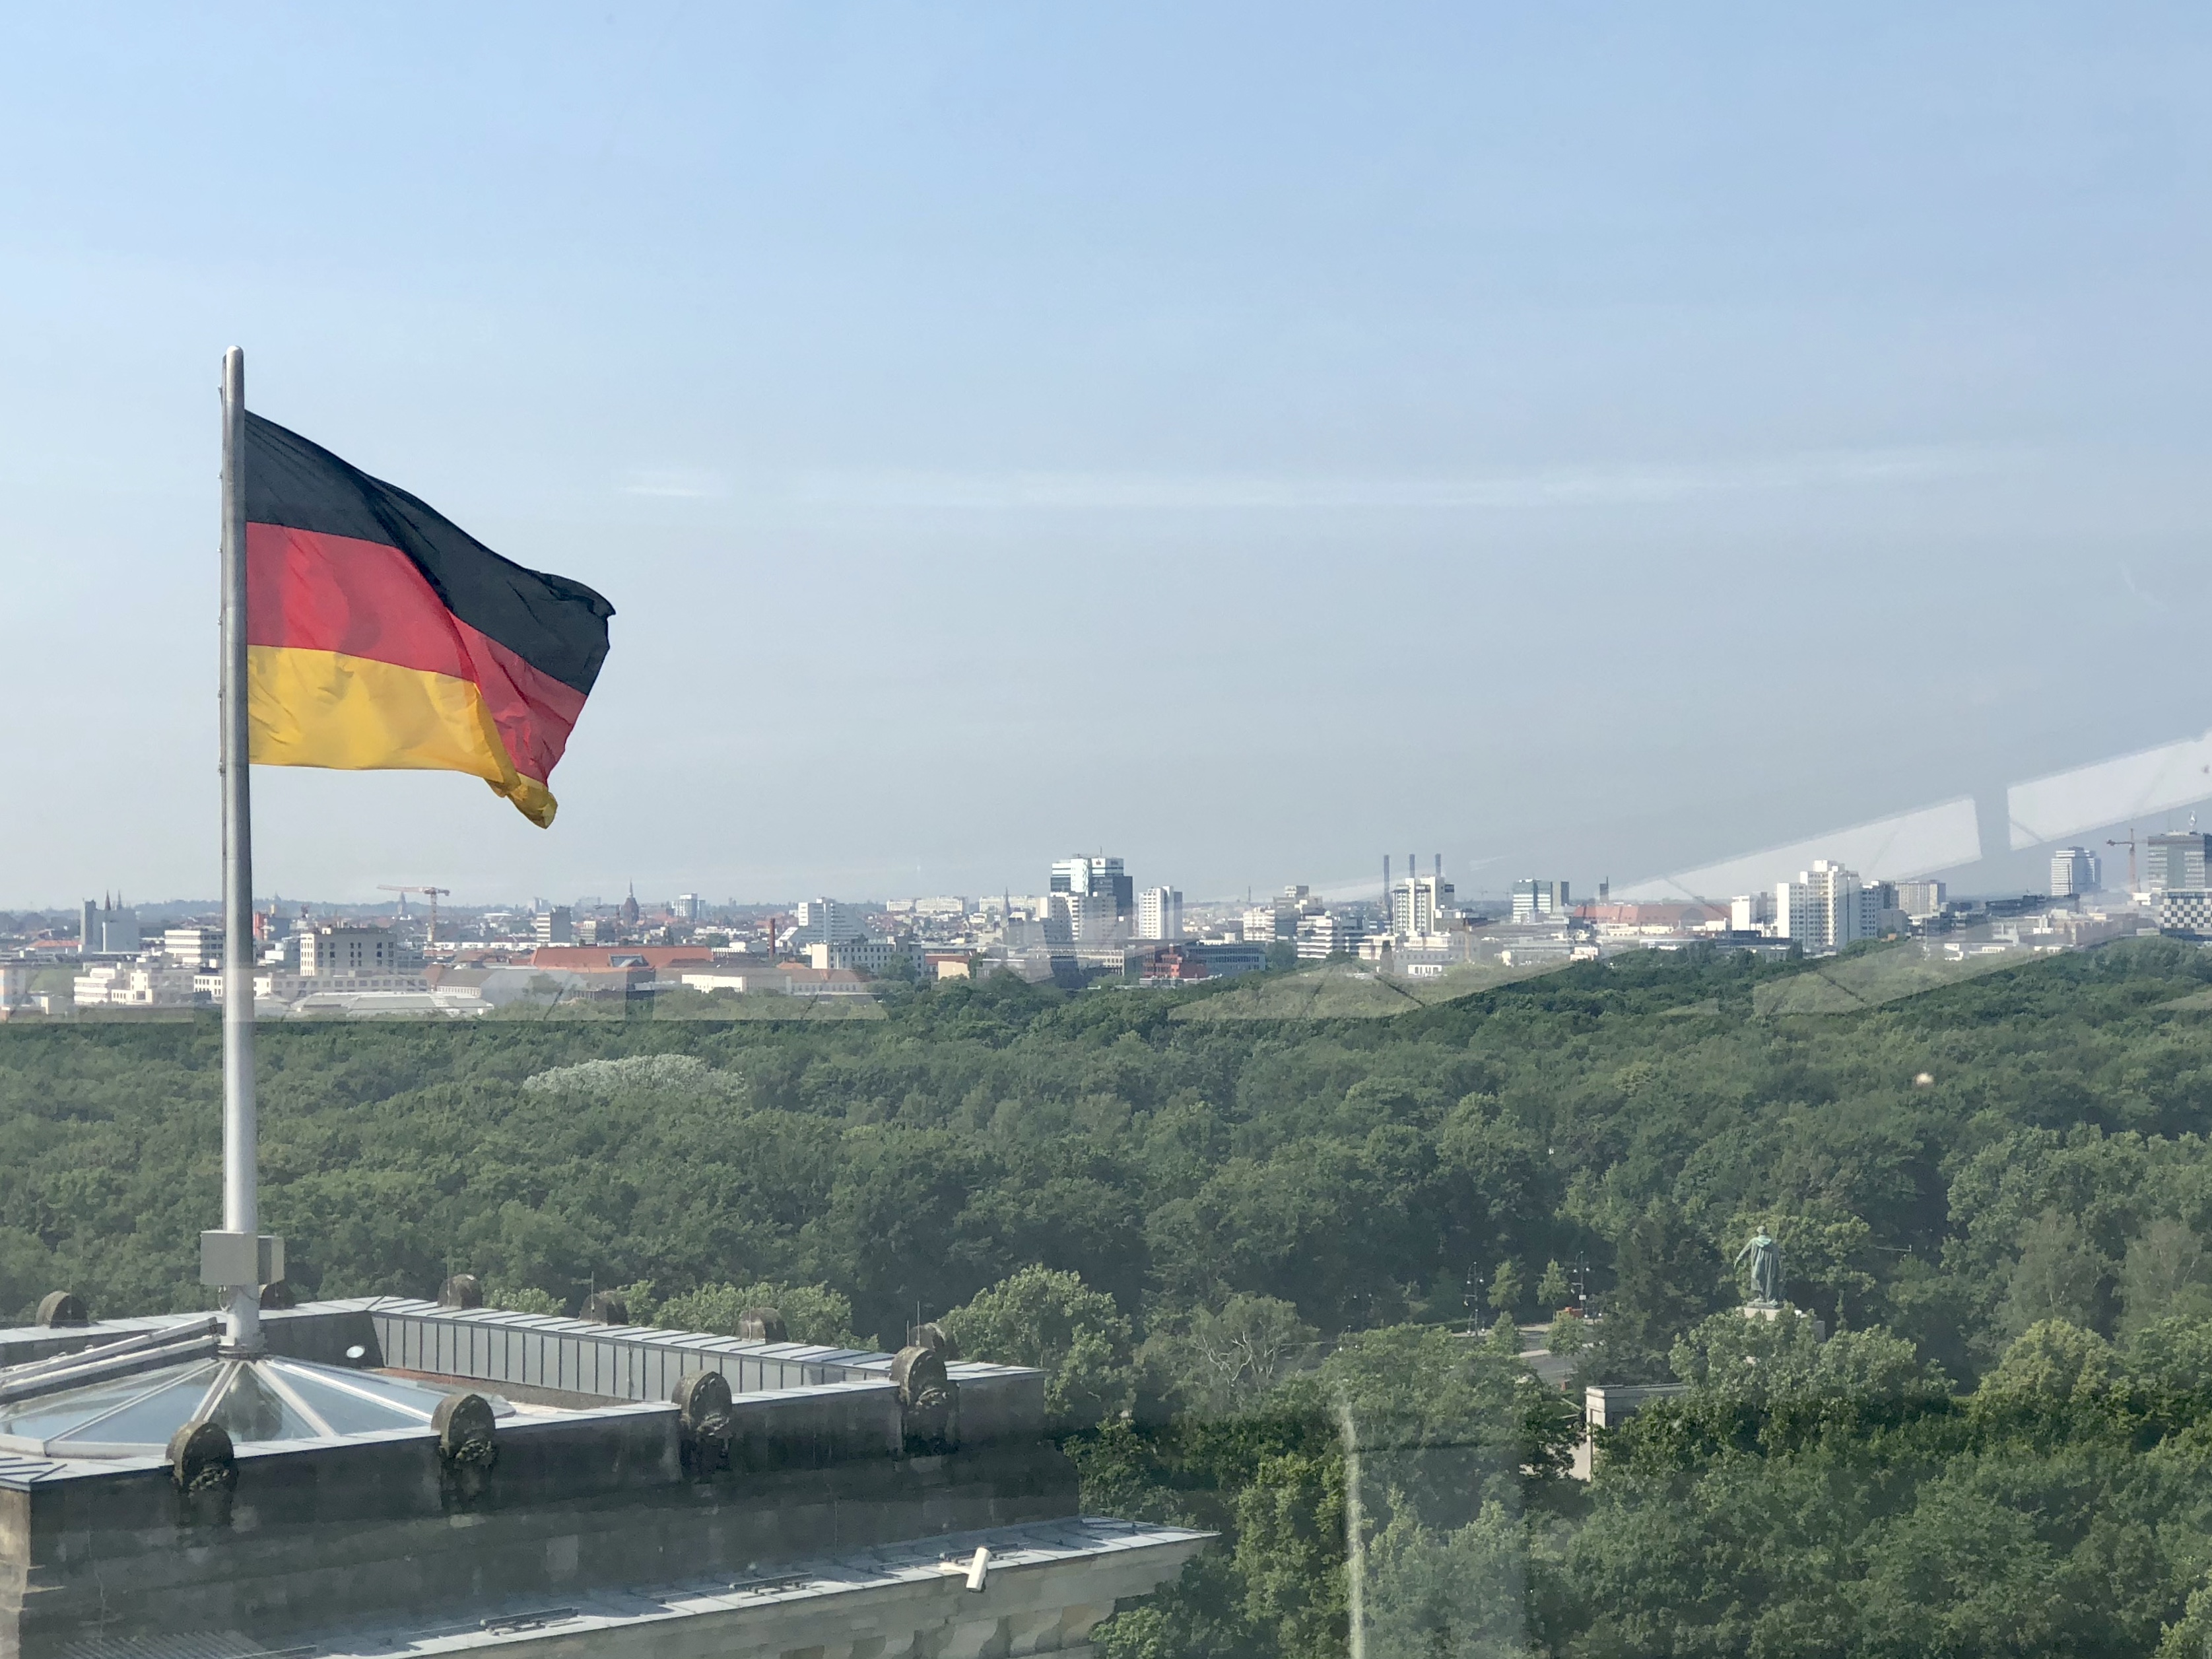 Follow this Summer 2018’s Office of Study Abroad & International Experiences Global Correspondent, Nour Khreim, on his studies in Pforzheim, Germany! Nour is a UMass Lowell Mechanical Engineering major studying this summer on a UMass Lowell Exchange study abroad program, Engineers Made in Germany (EMIG).